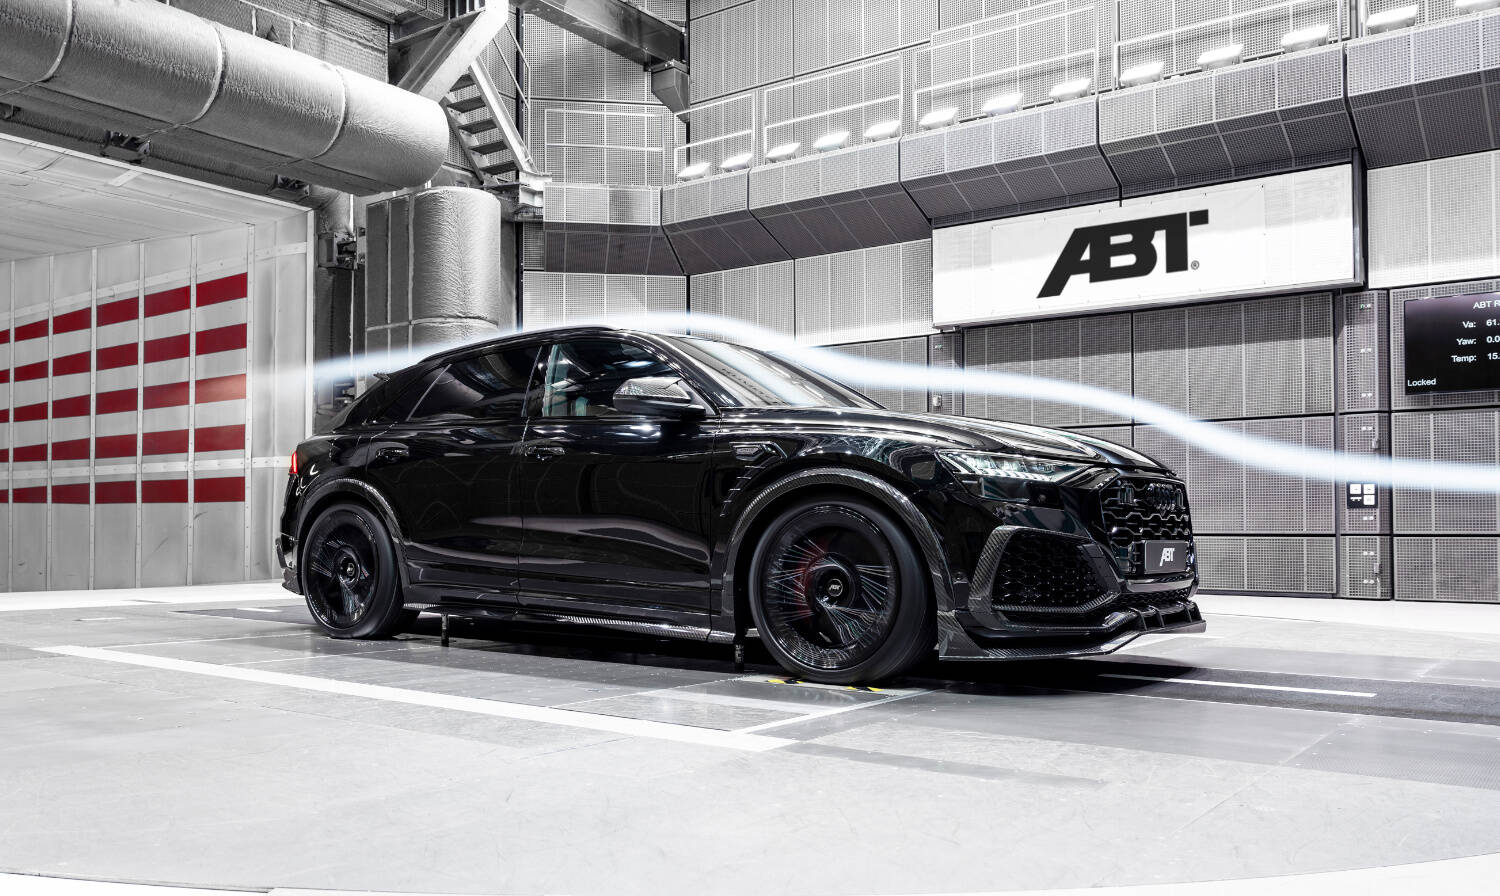 The limited RSQ8 Signature Edition with 800 HP and 1,000 Nm